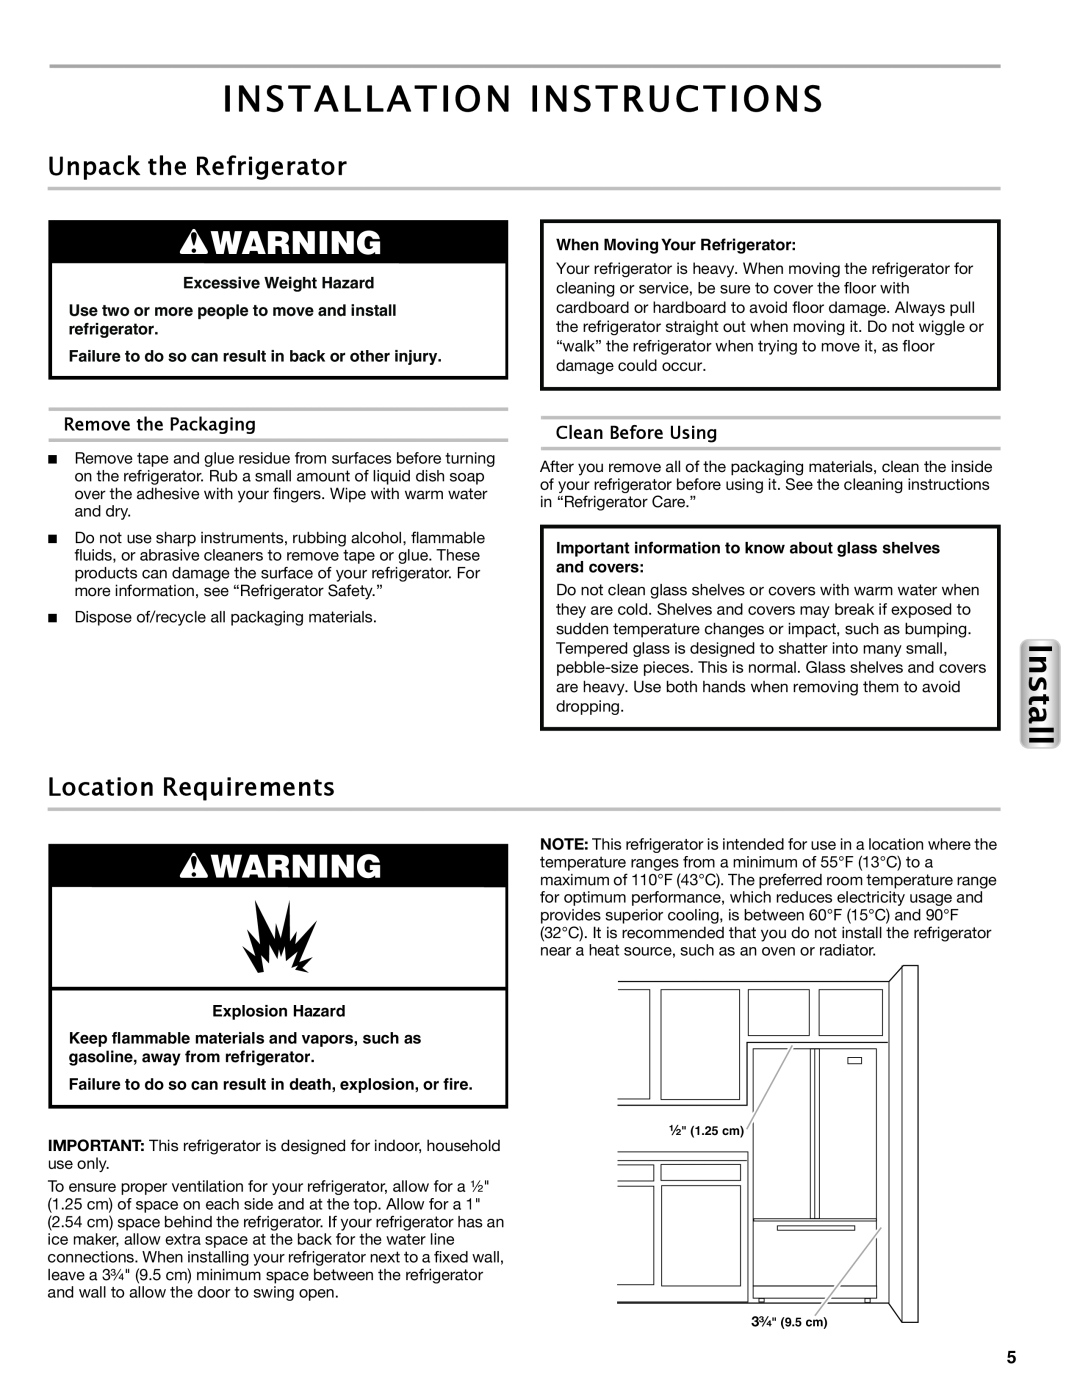 Maytag W10558104A manual Installation Instructions, Unpack the Refrigerator, Location Requirements, Remove the Packaging 